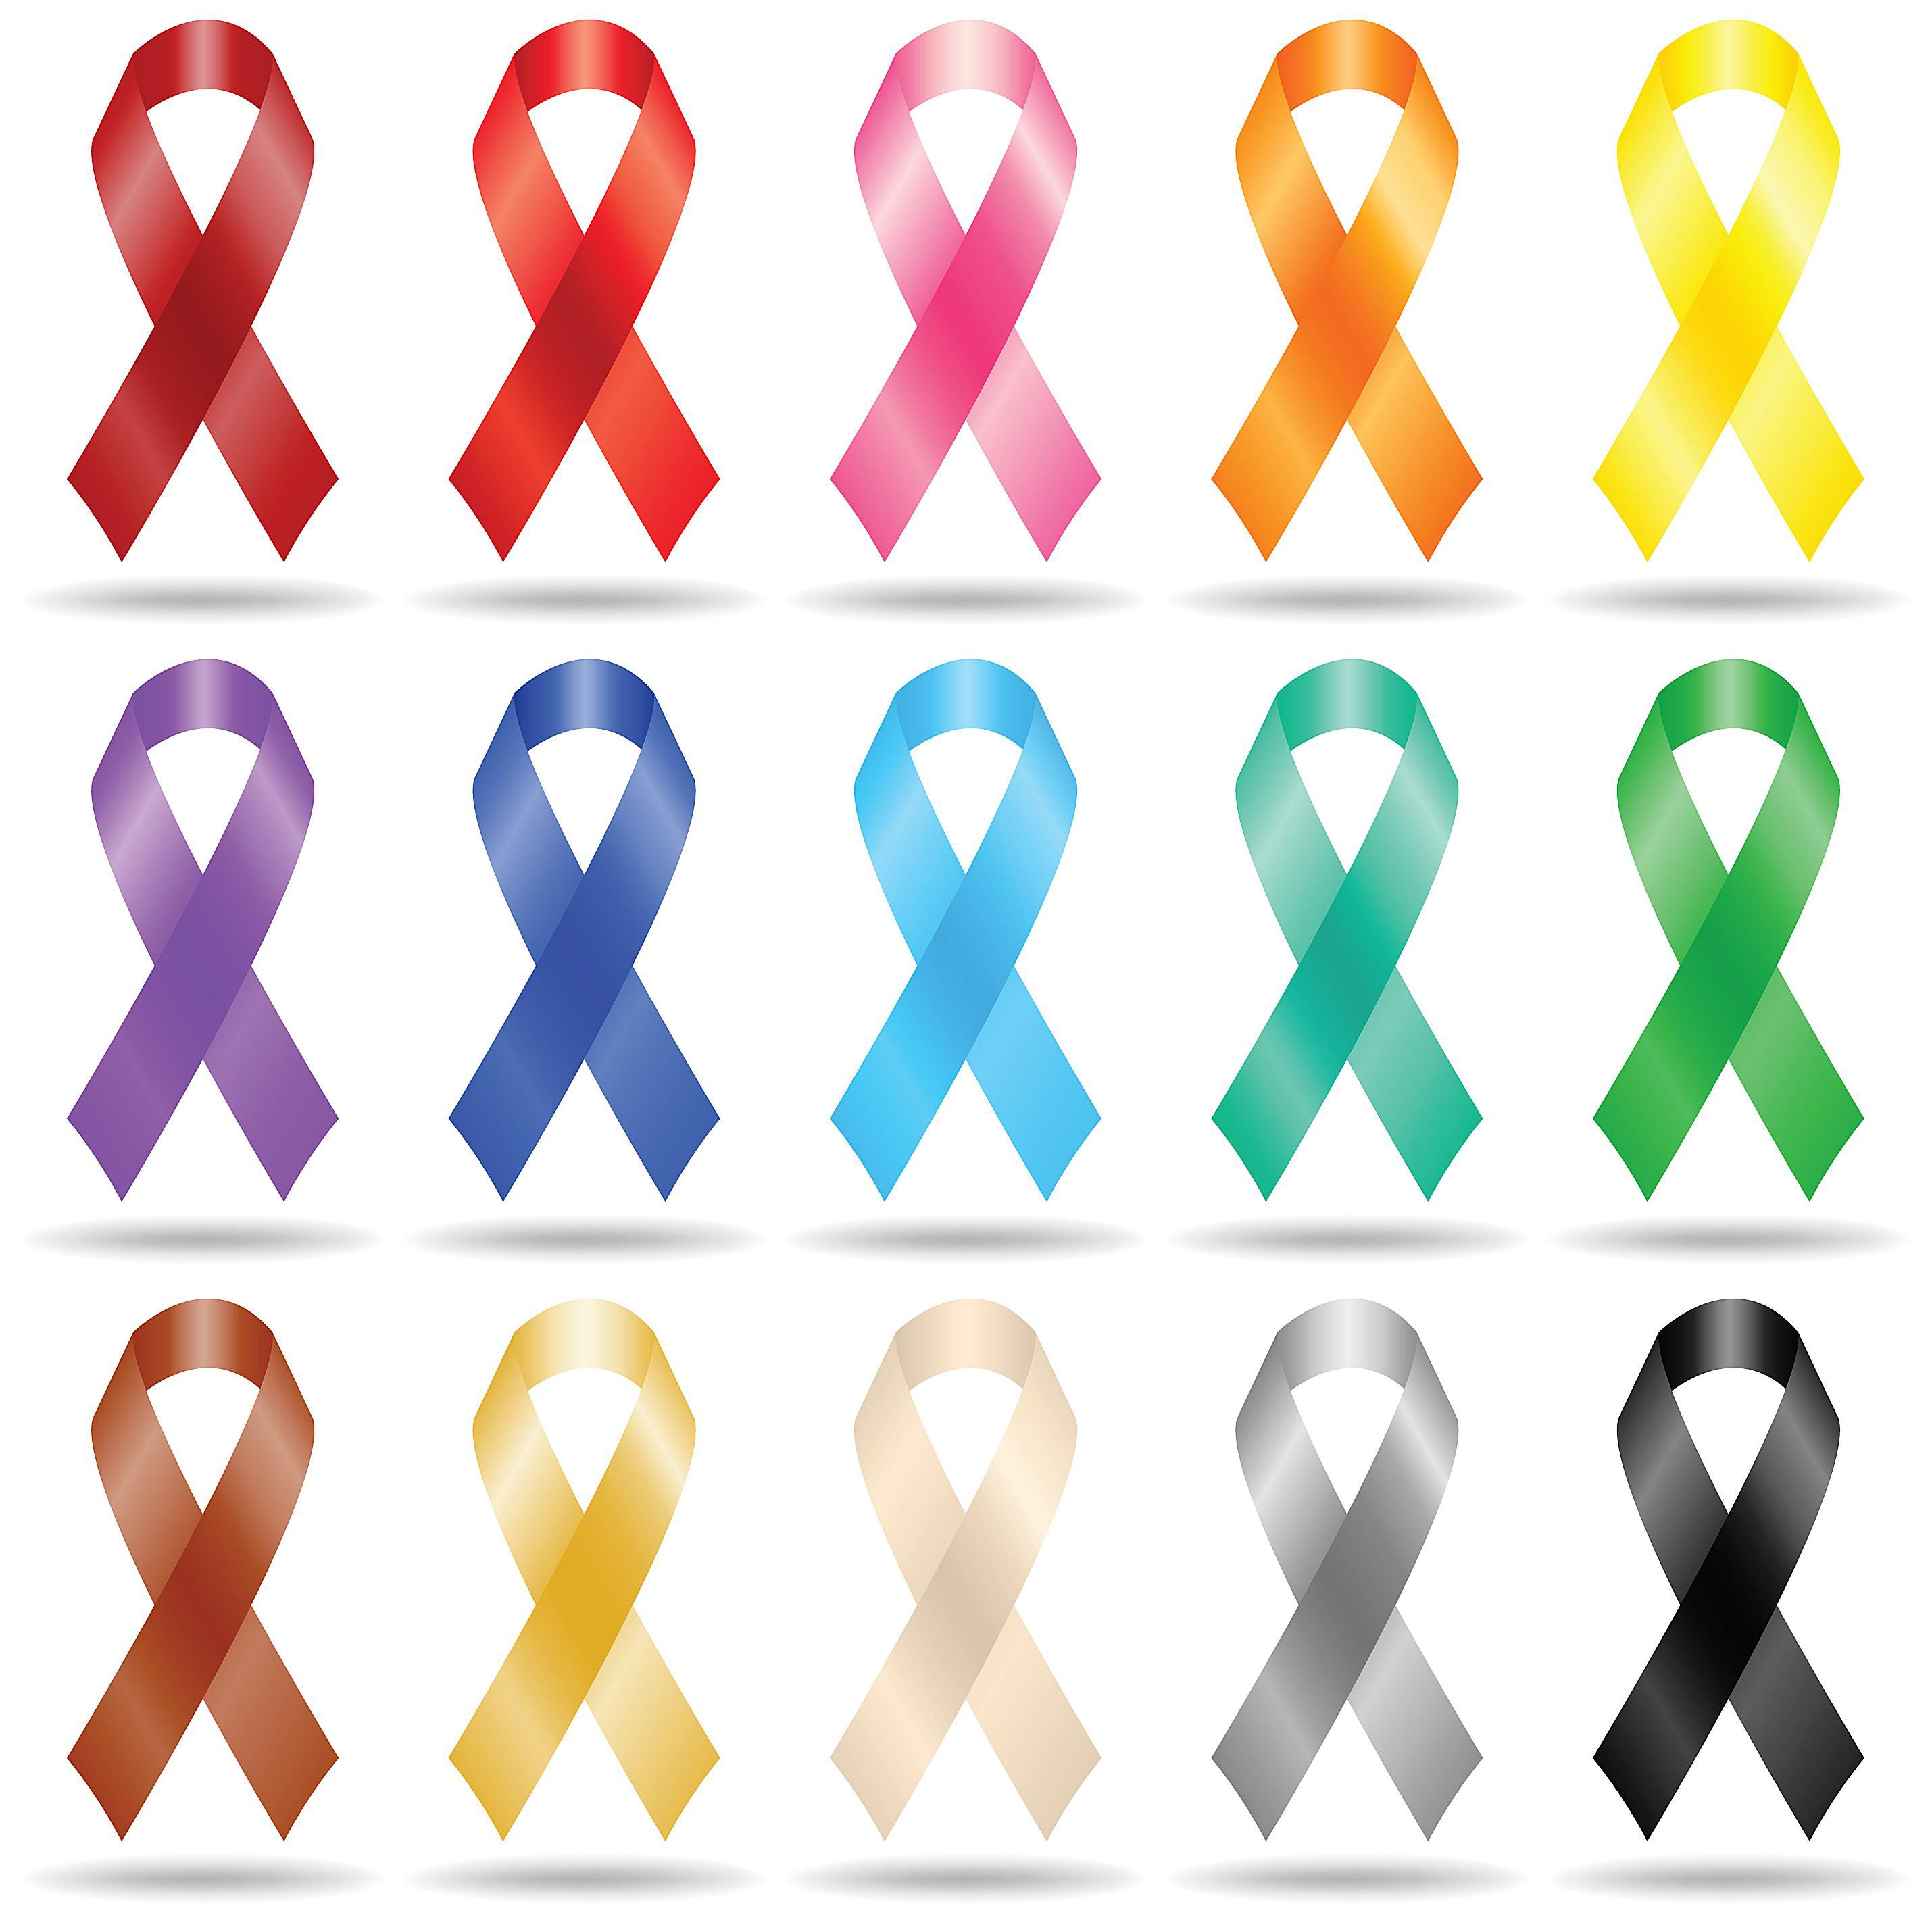 Types Of Ribbons For Awareness